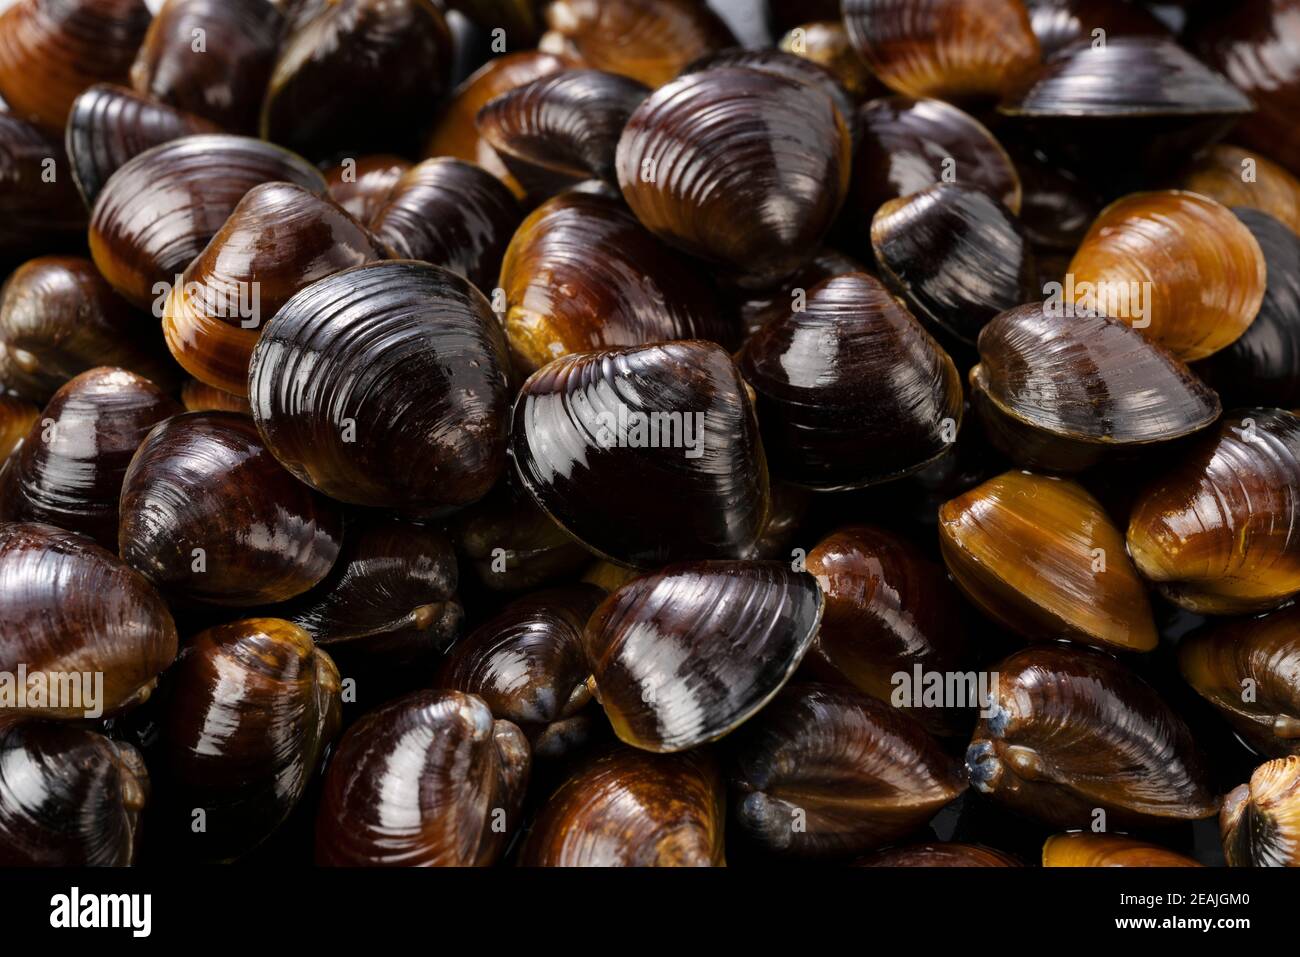 A freshwater clam placed across the screen Stock Photo